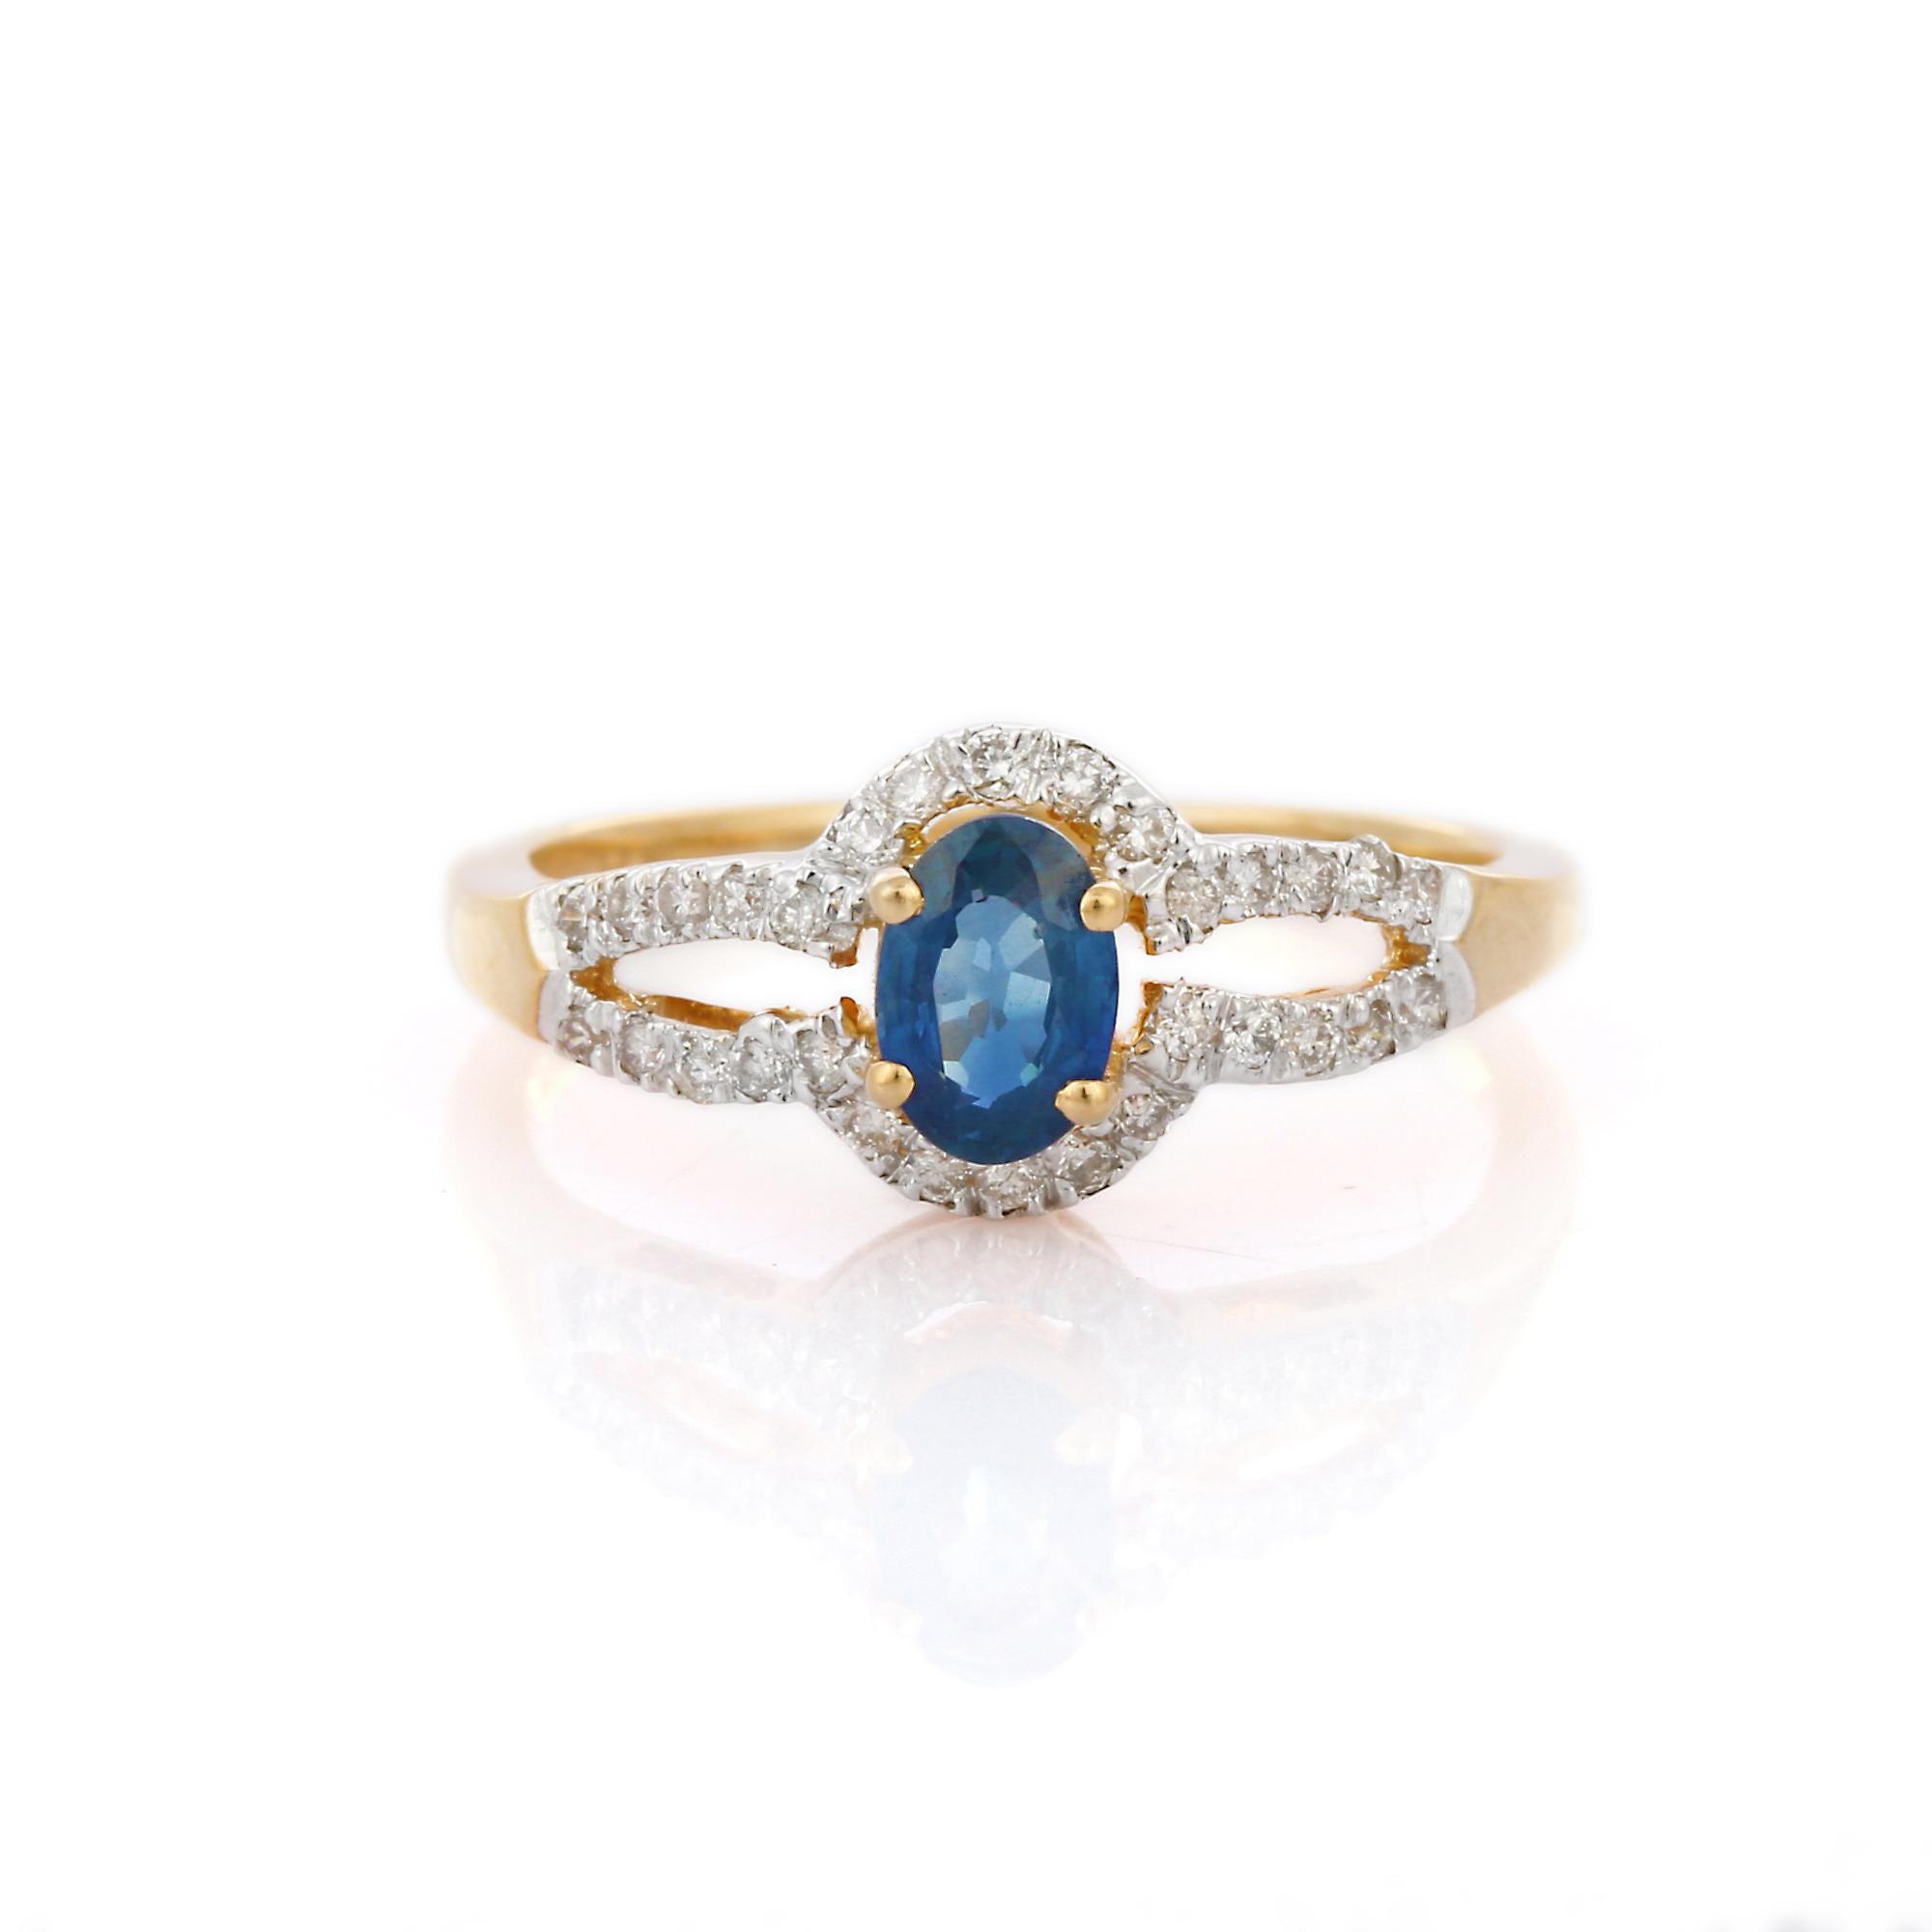 For Sale:  Simple Sapphire Diamond Engagement Ring in 18K Solid Yellow Gold 5